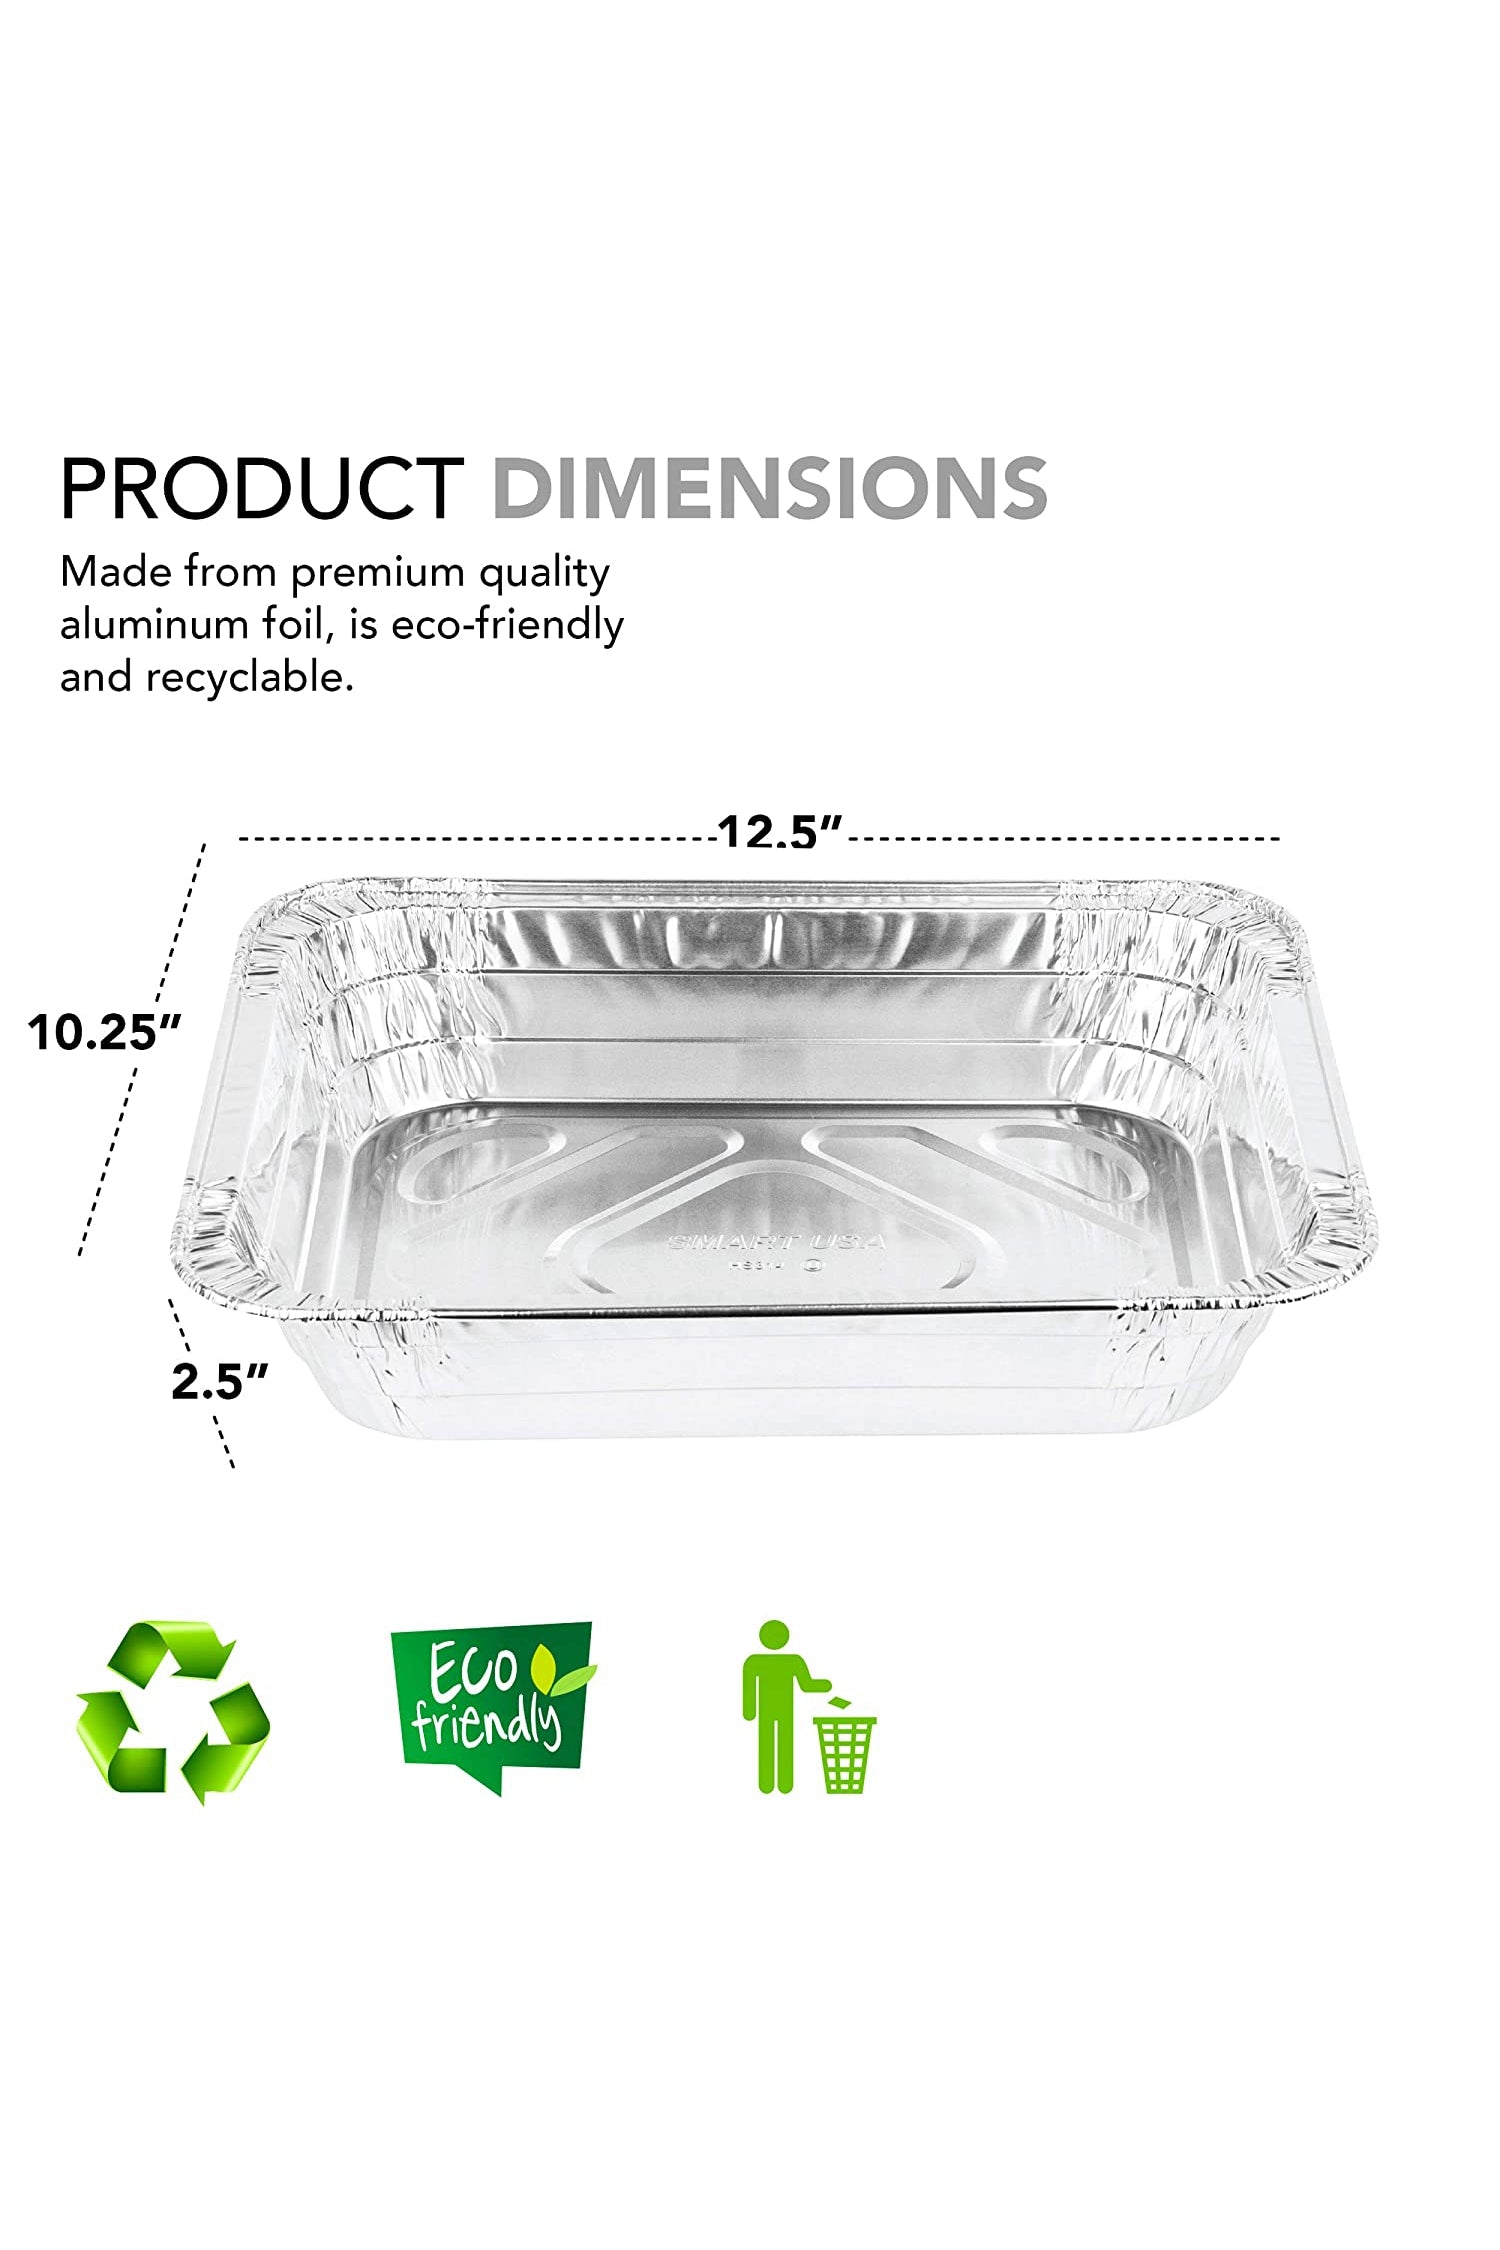 Aluminum Pans 9x13 [30 Pack] Aluminum Foil Pans Trays - Disposable Pans for  Baking, BBQ Grilling, Roasting, Cake Serving Dishes, Catering Supplies